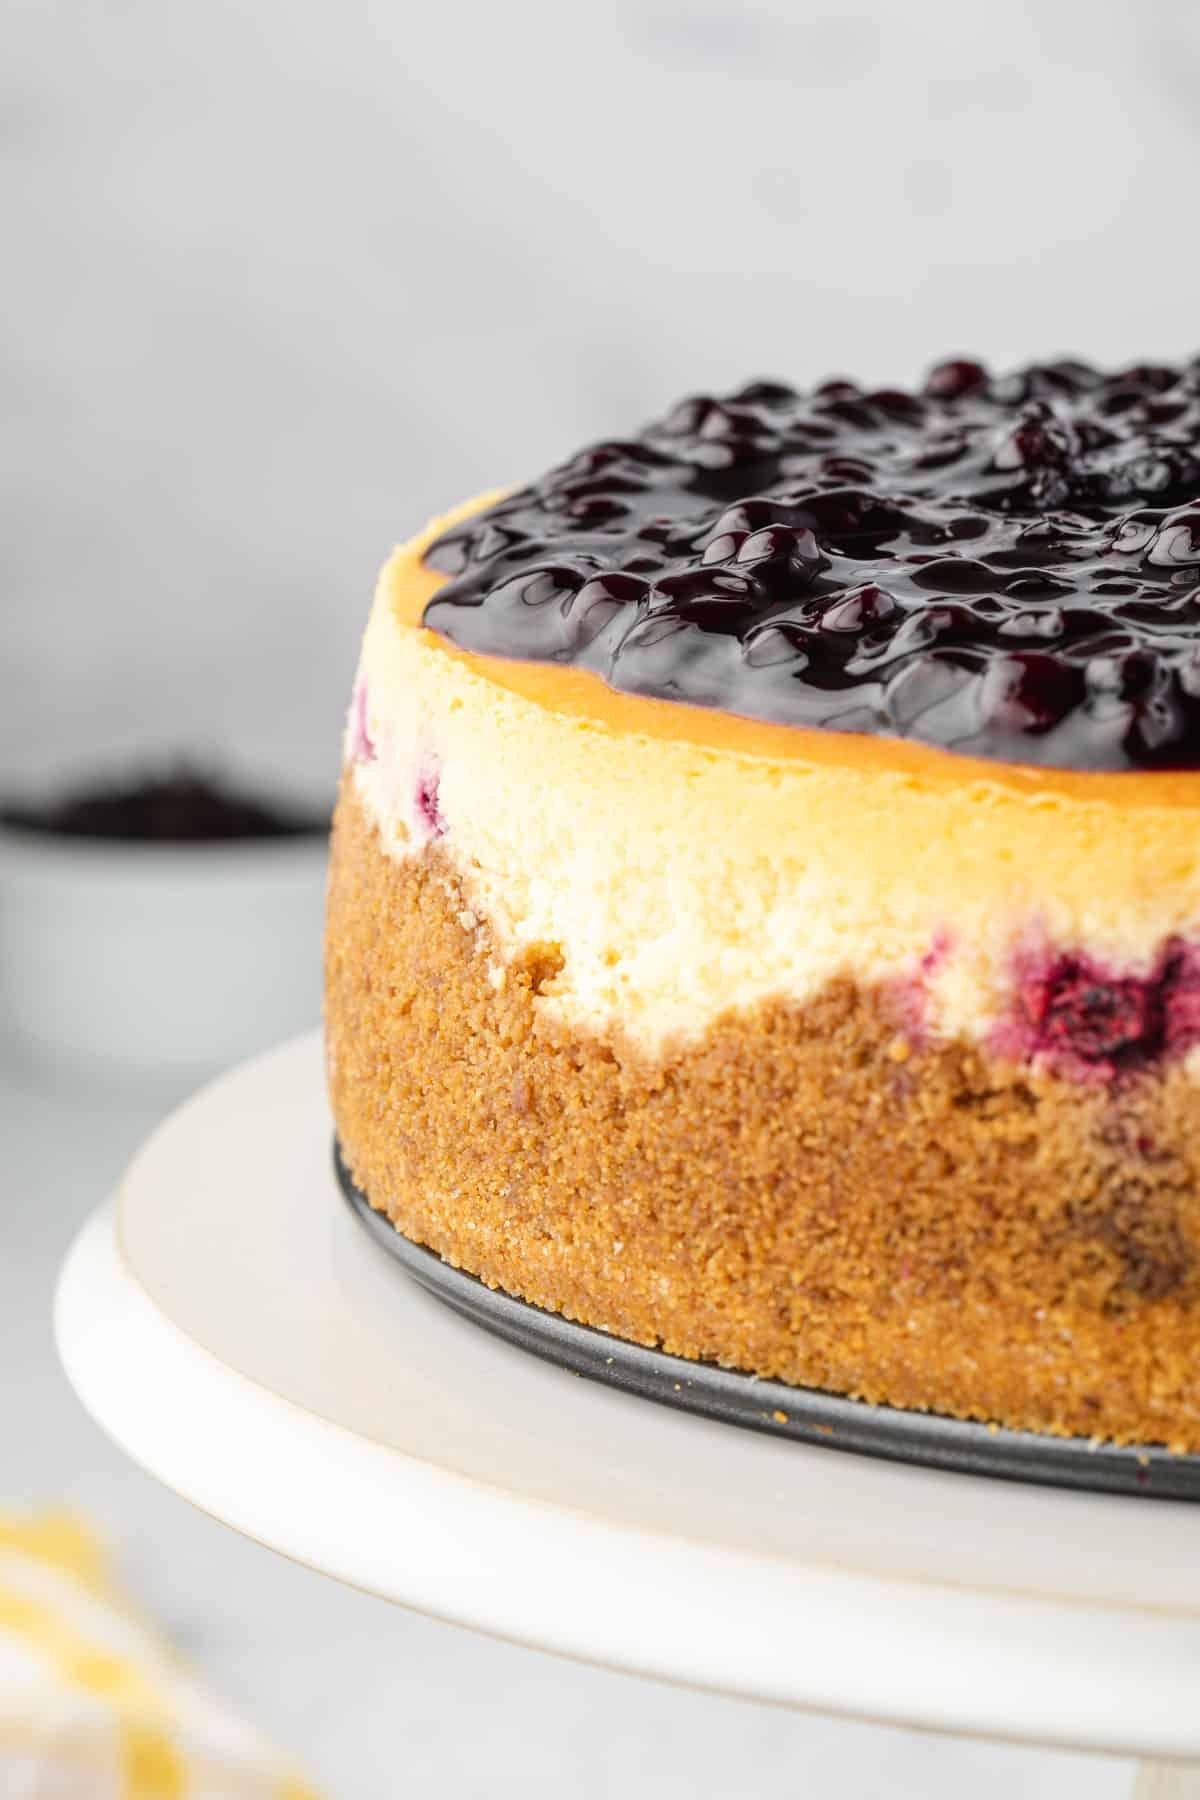 Close up showing half of huckleberry cheesecake from the side, on a cake stand.